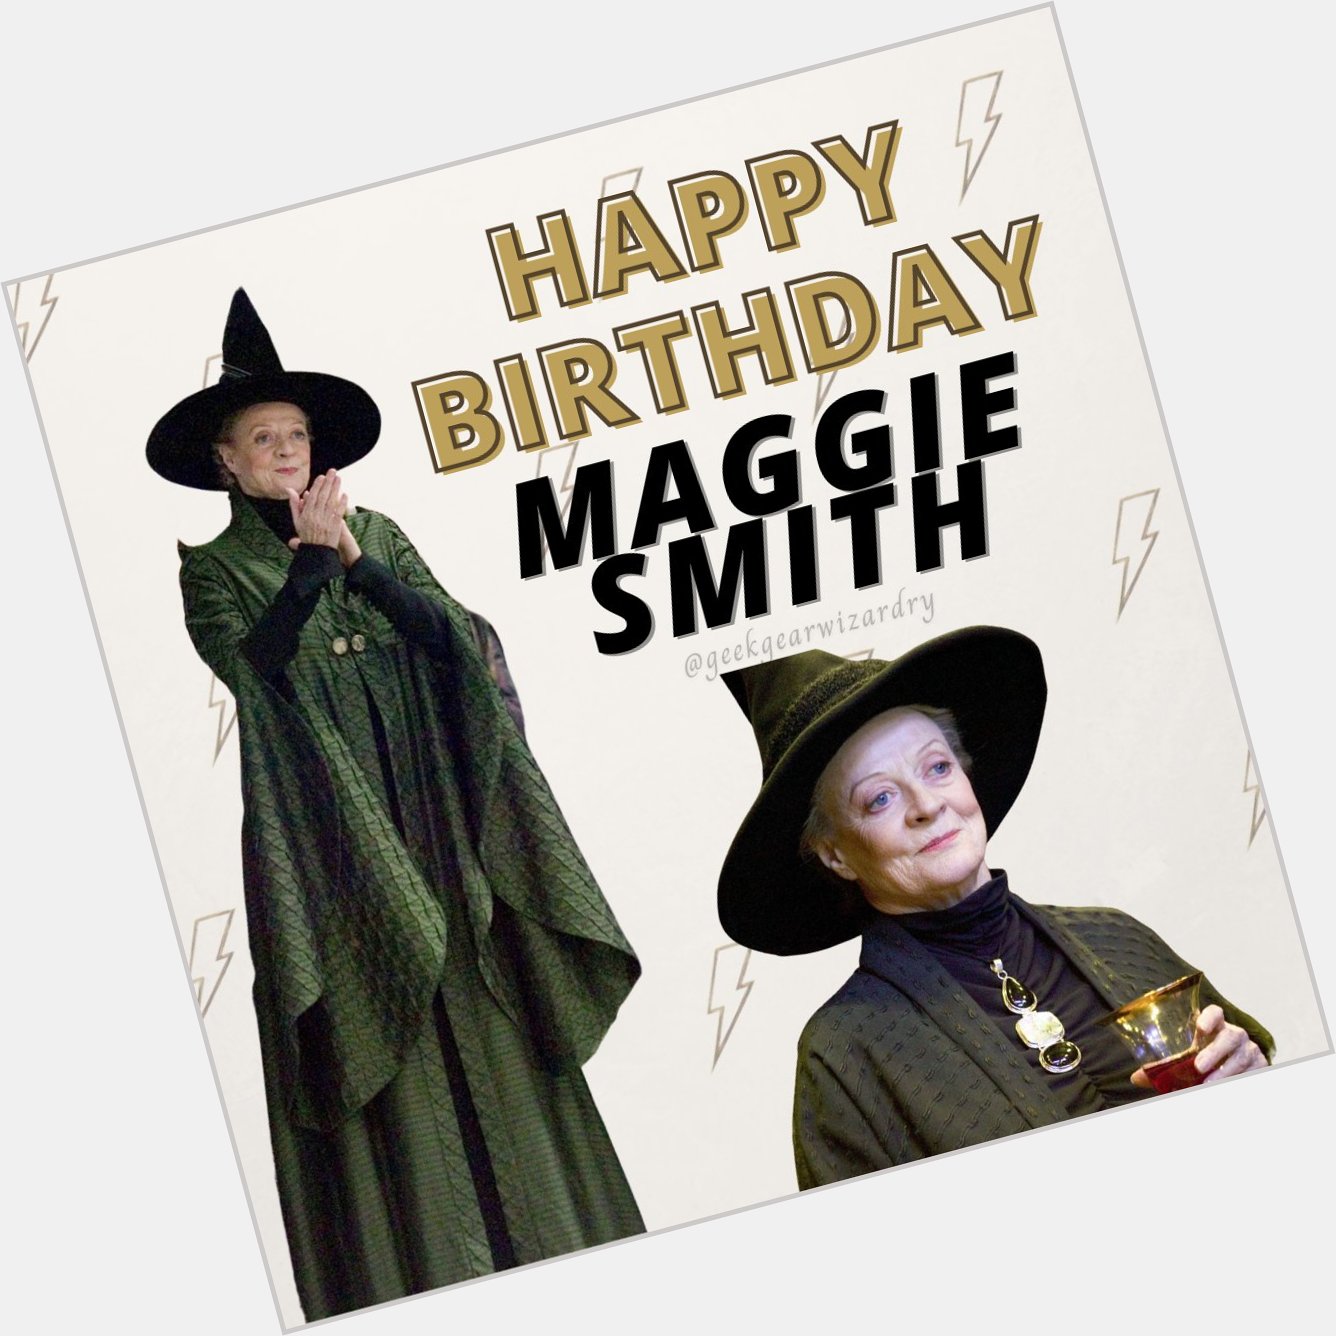  HAPPY BIRTHDAY MAGGIE SMITH! A potter legend born on this day in 1934! 